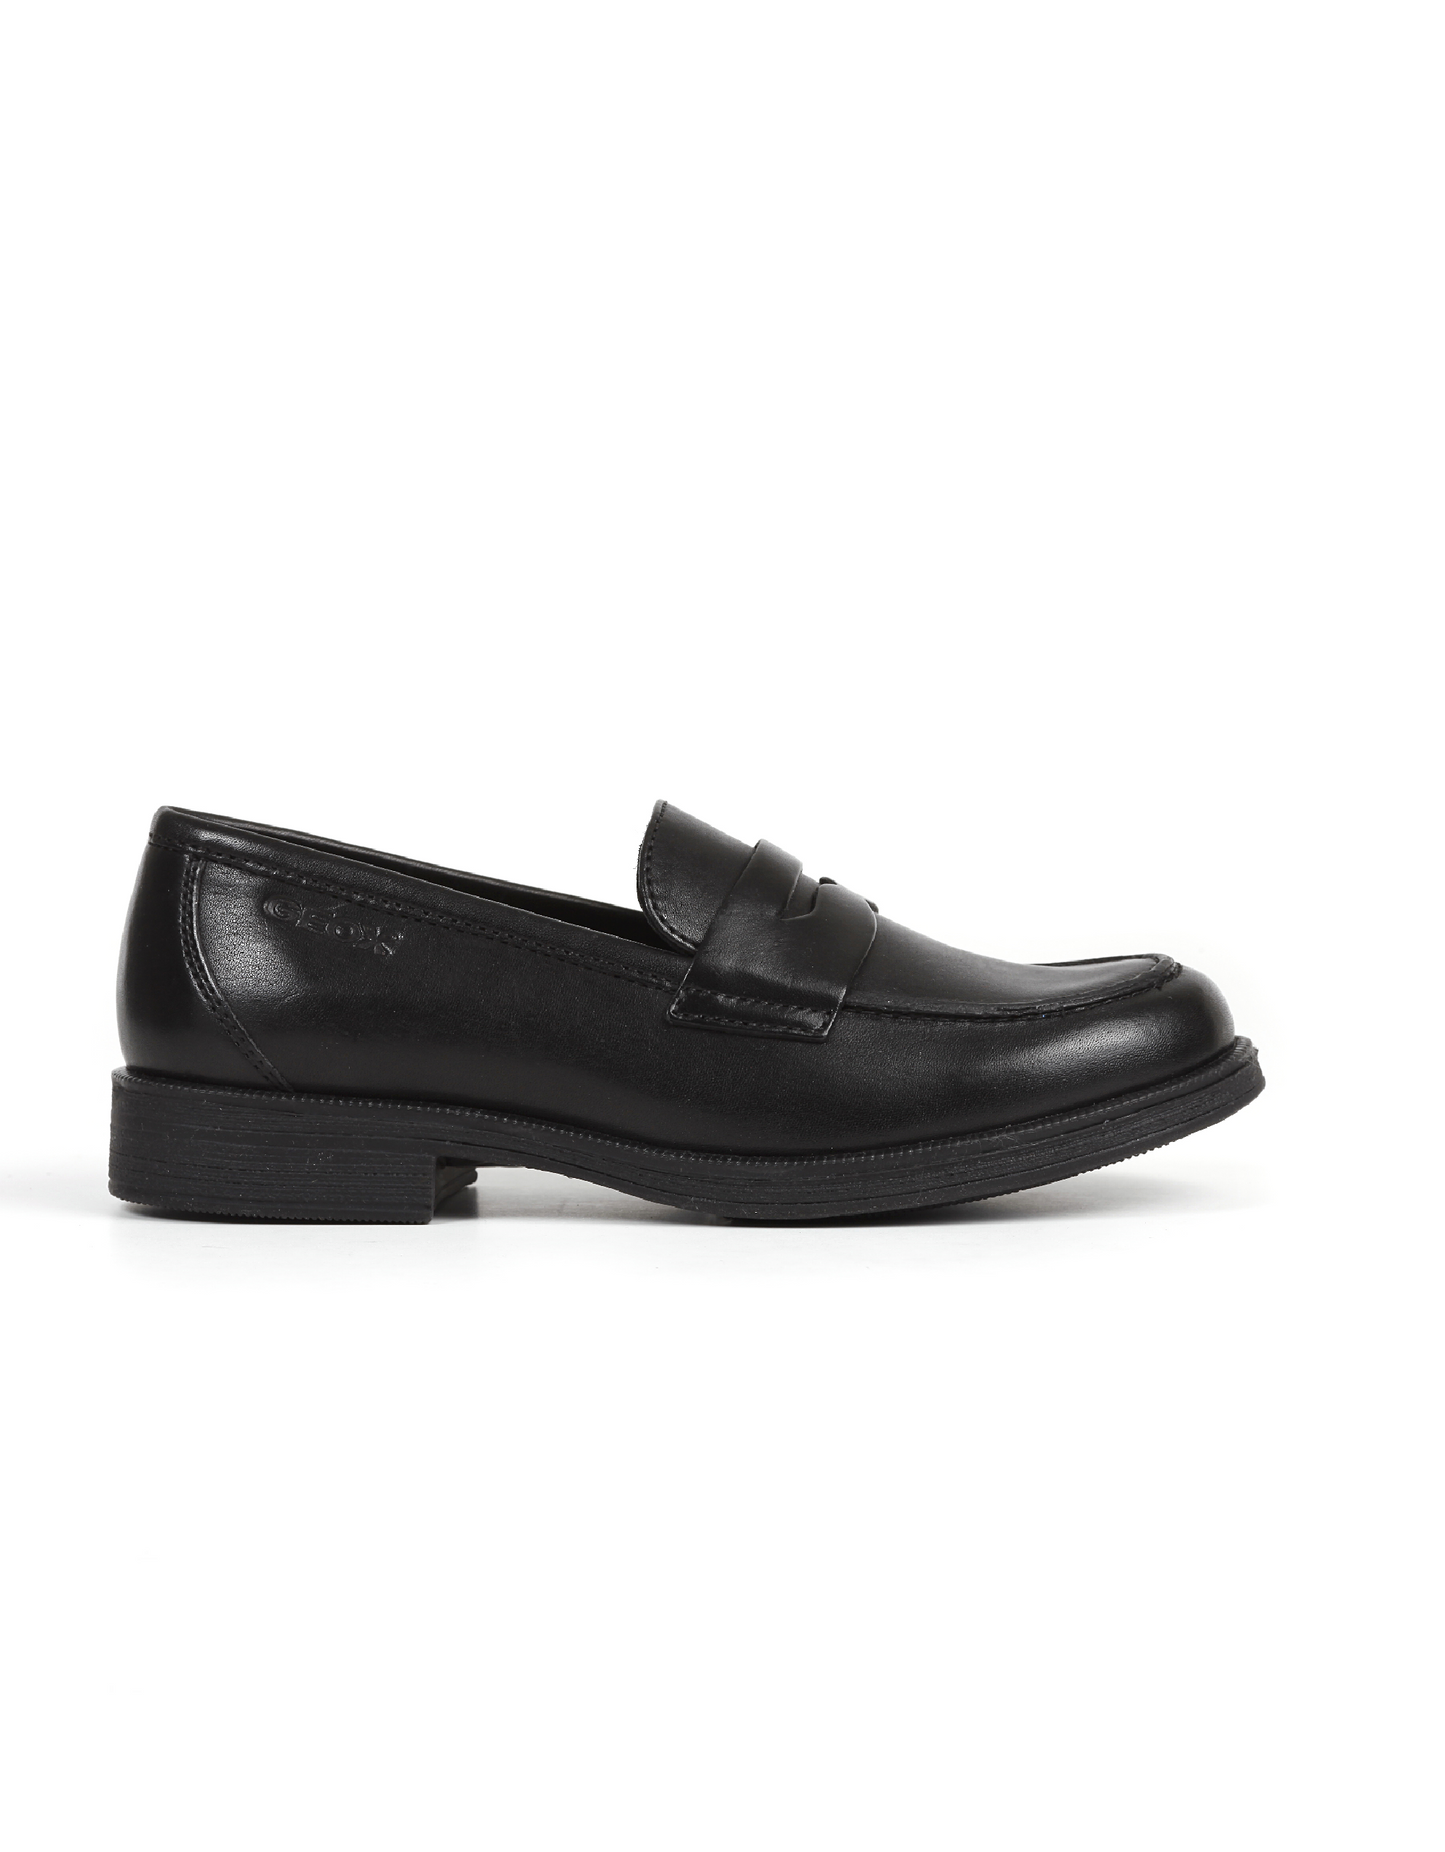 Geox Agata Black Leather Loafers